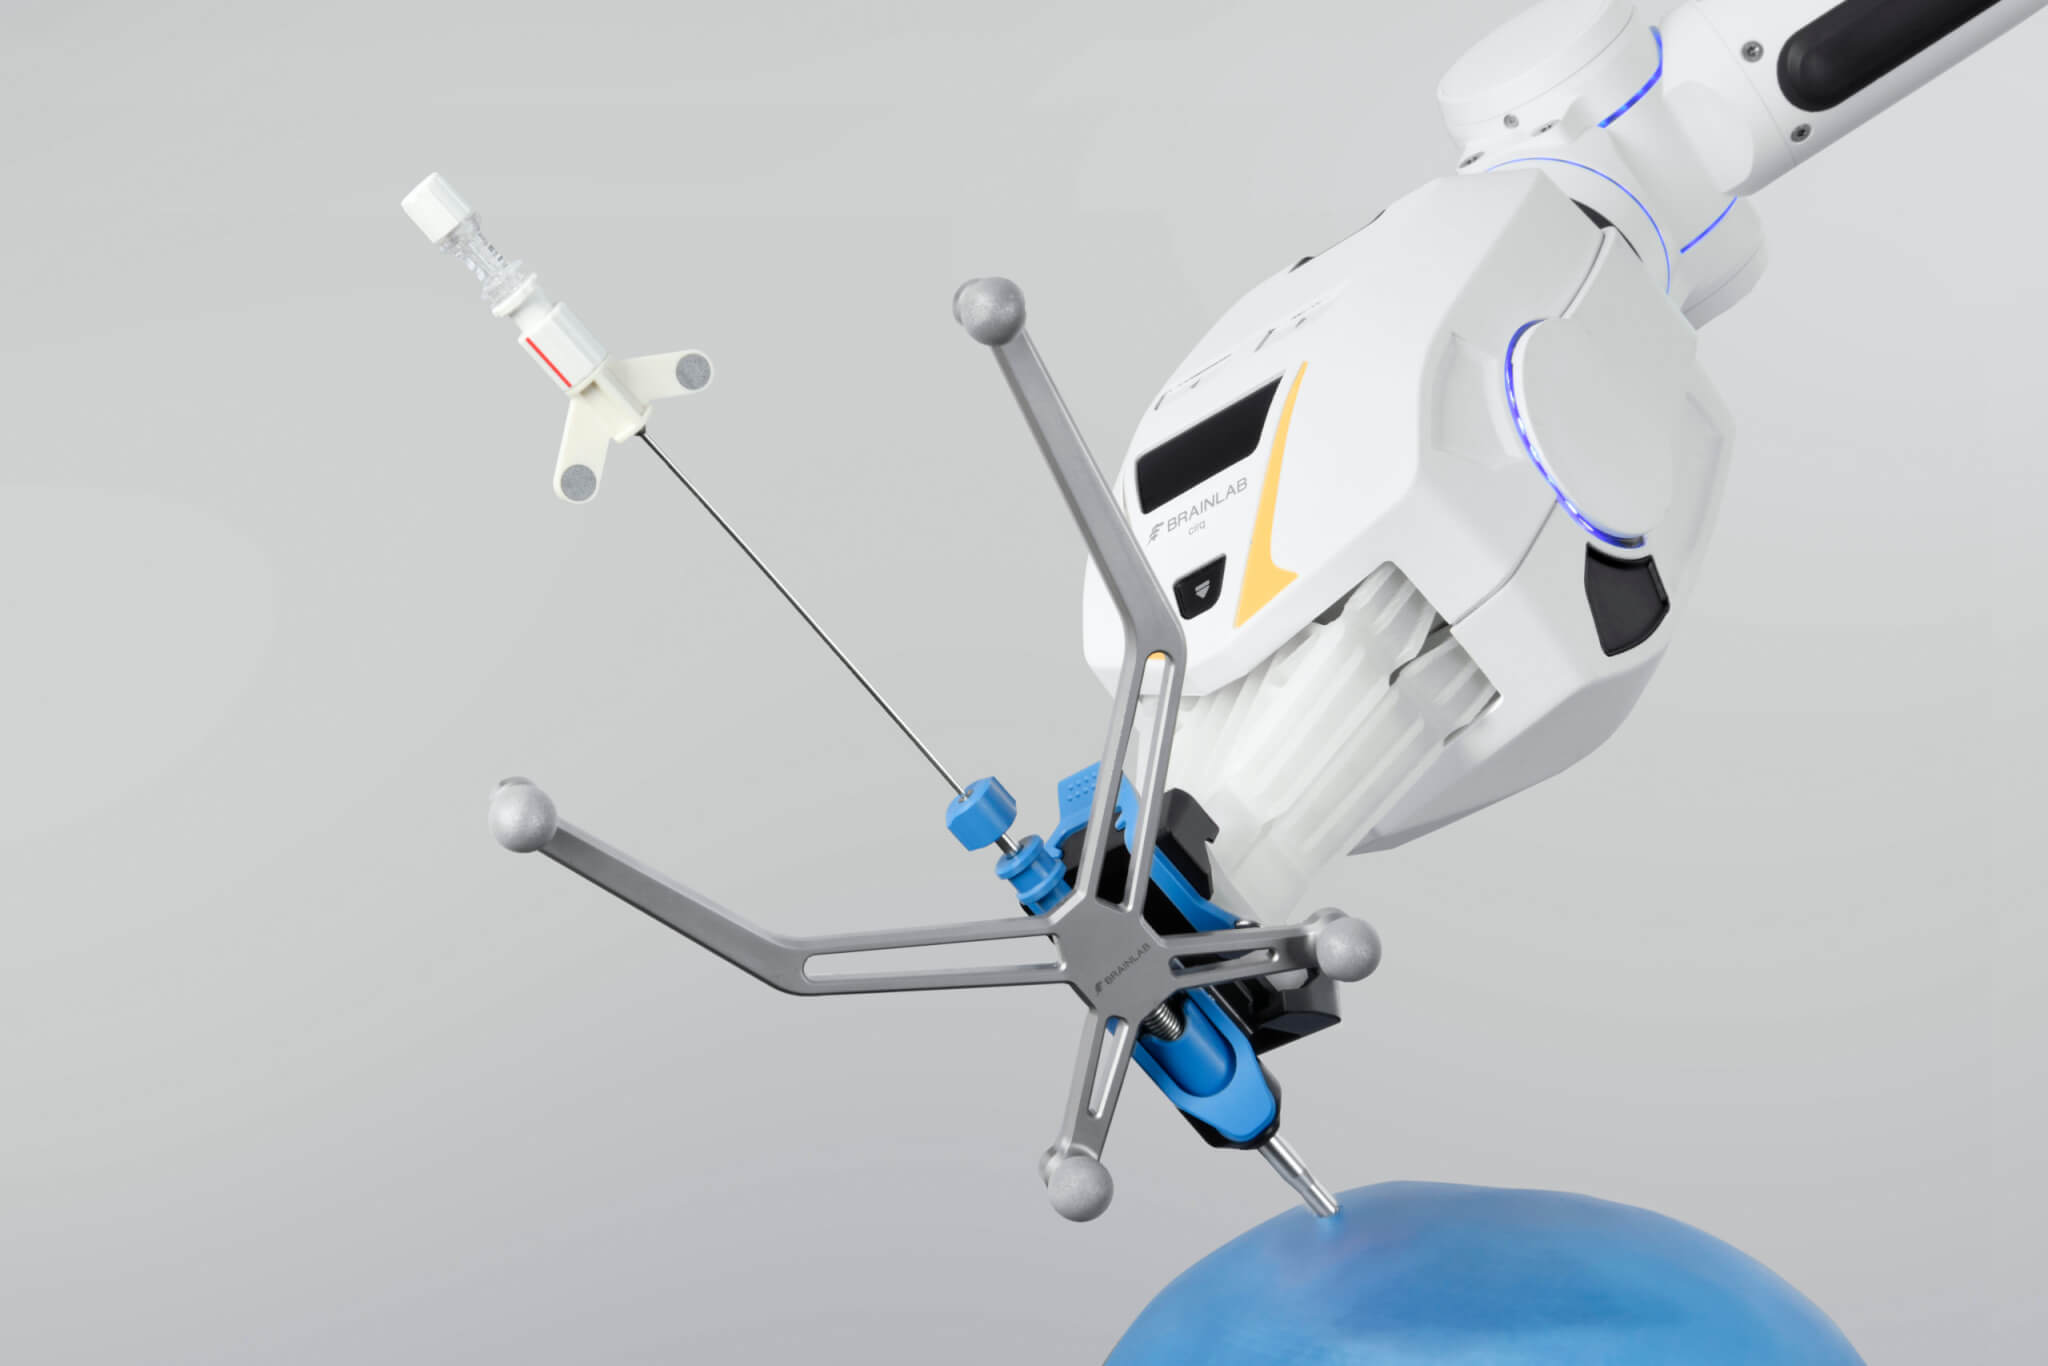 The cranial surgery module of a robotic surgical arm system holds a navigated biopsy needle as it hovers over a blue representation of a skull in front of a light gray background